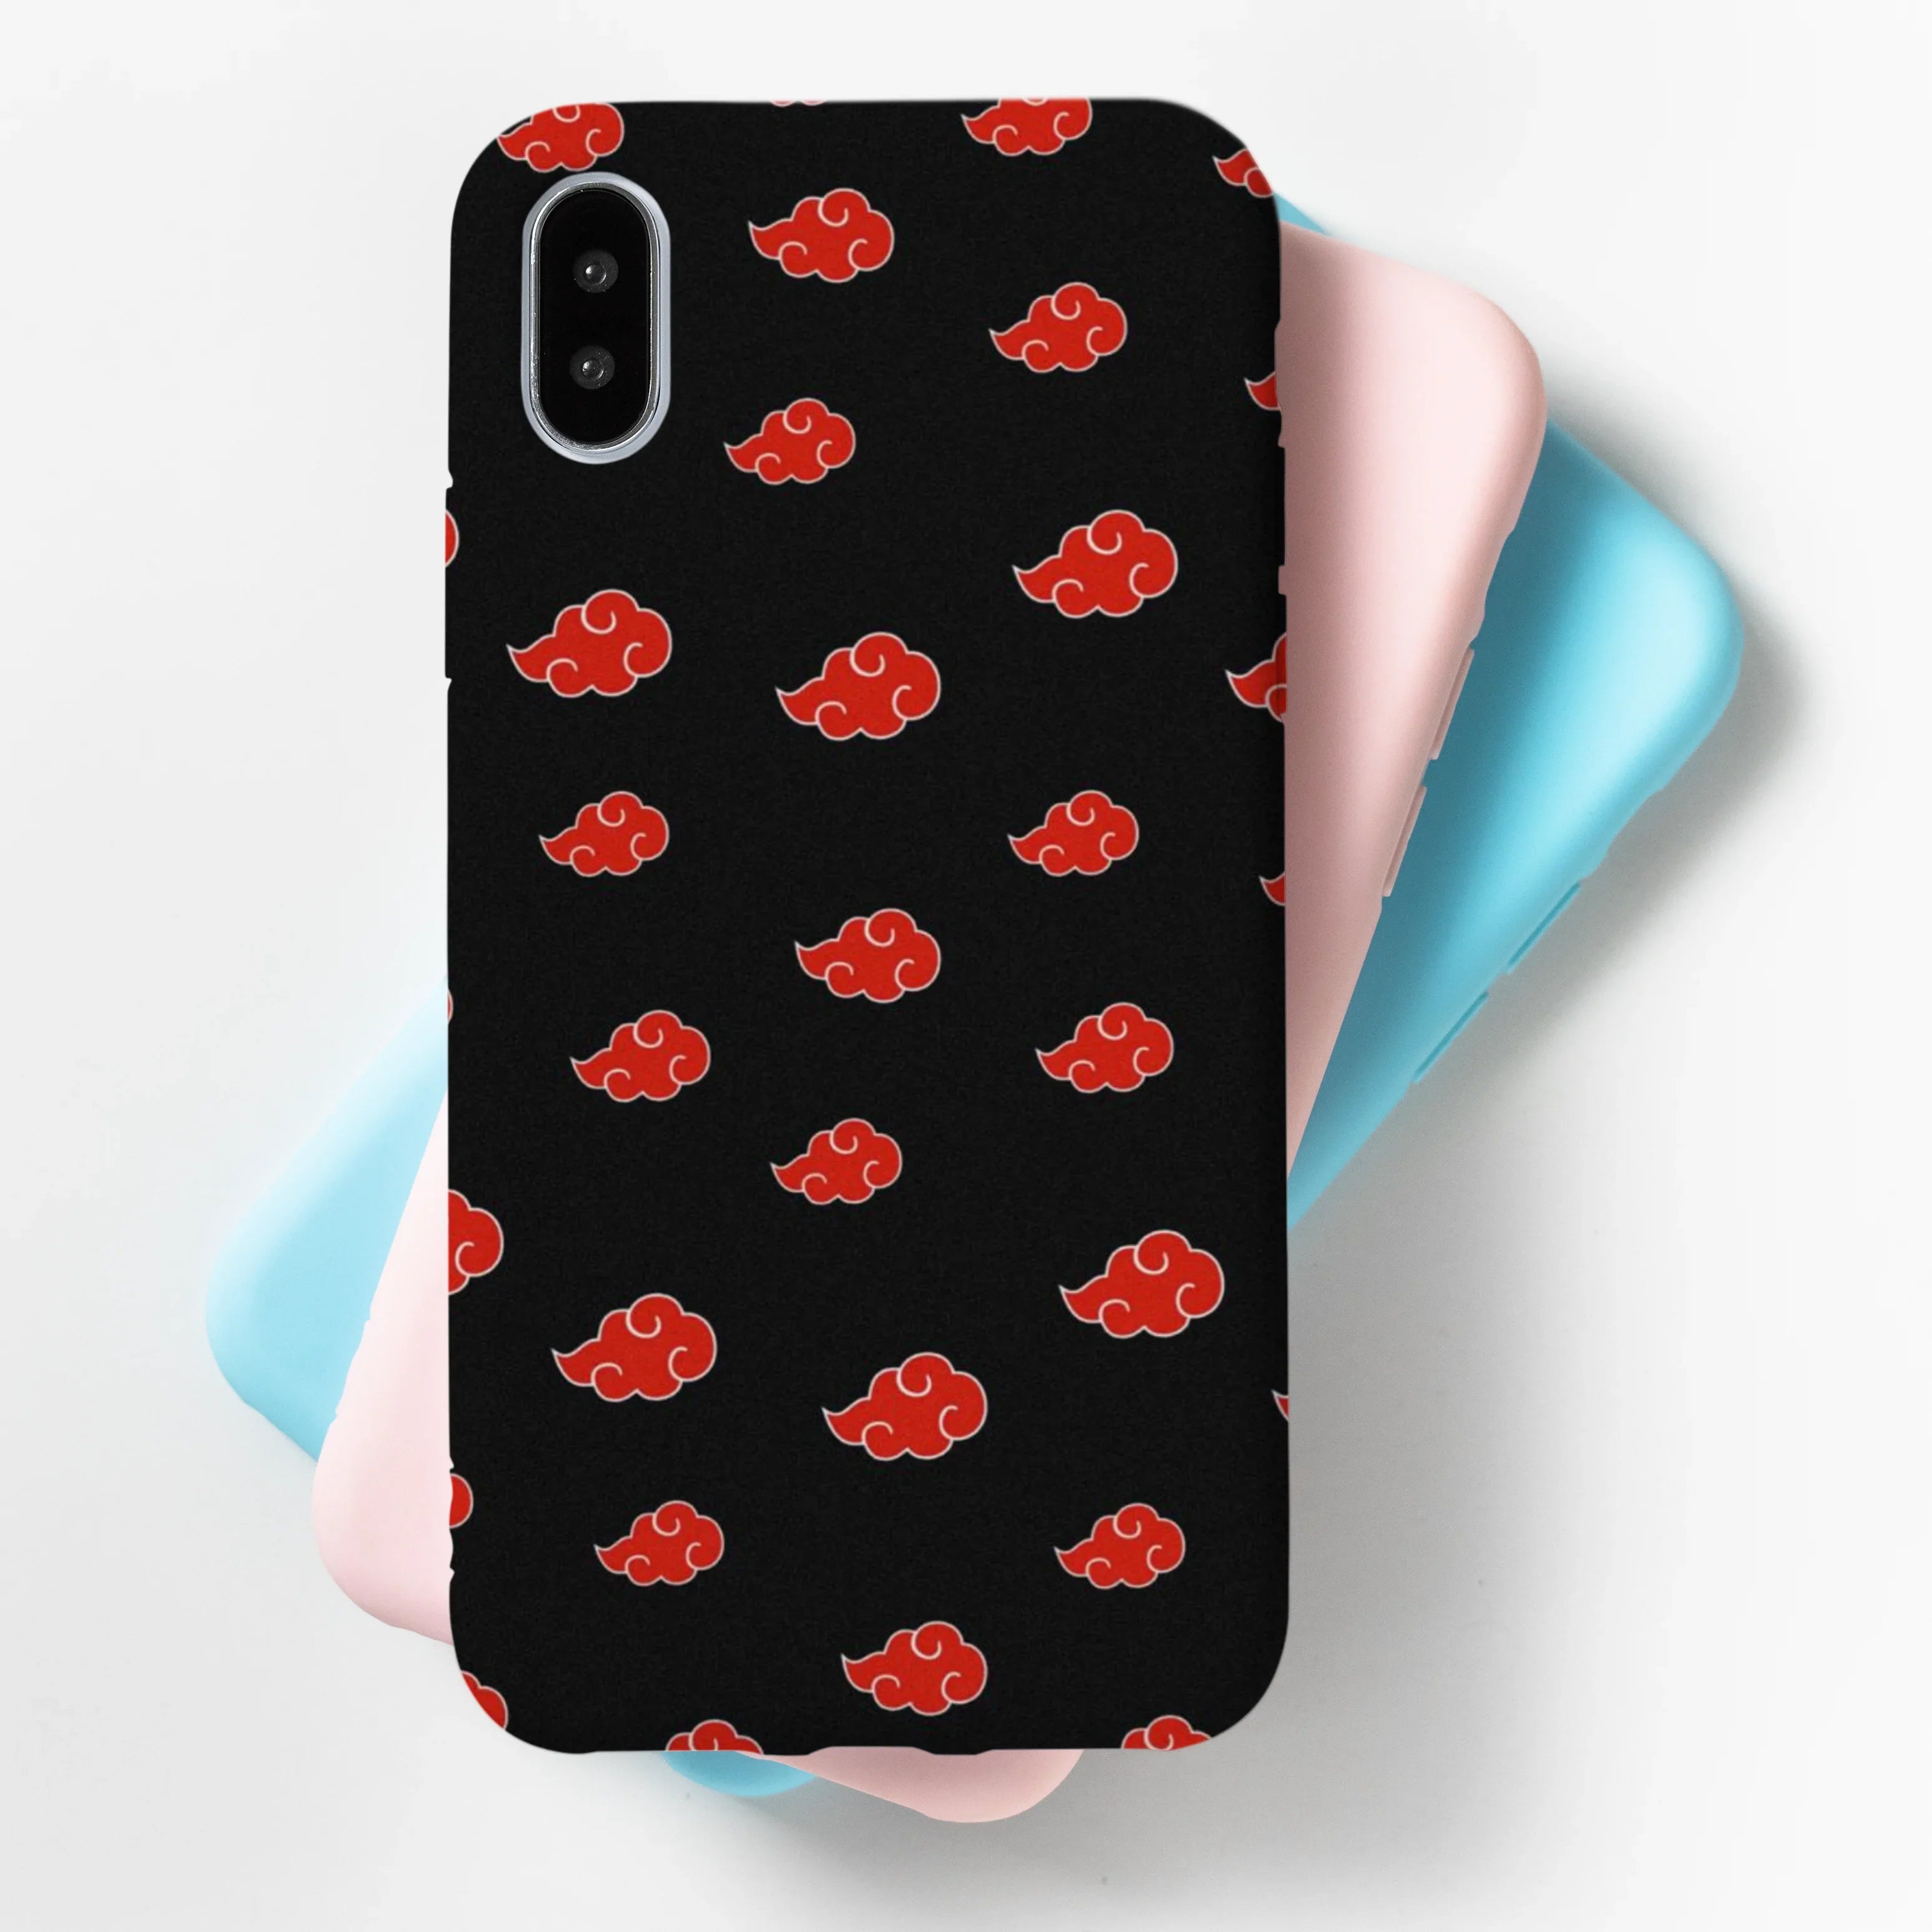 Akatsuki Phone Skin Wrap Compatible For All Models